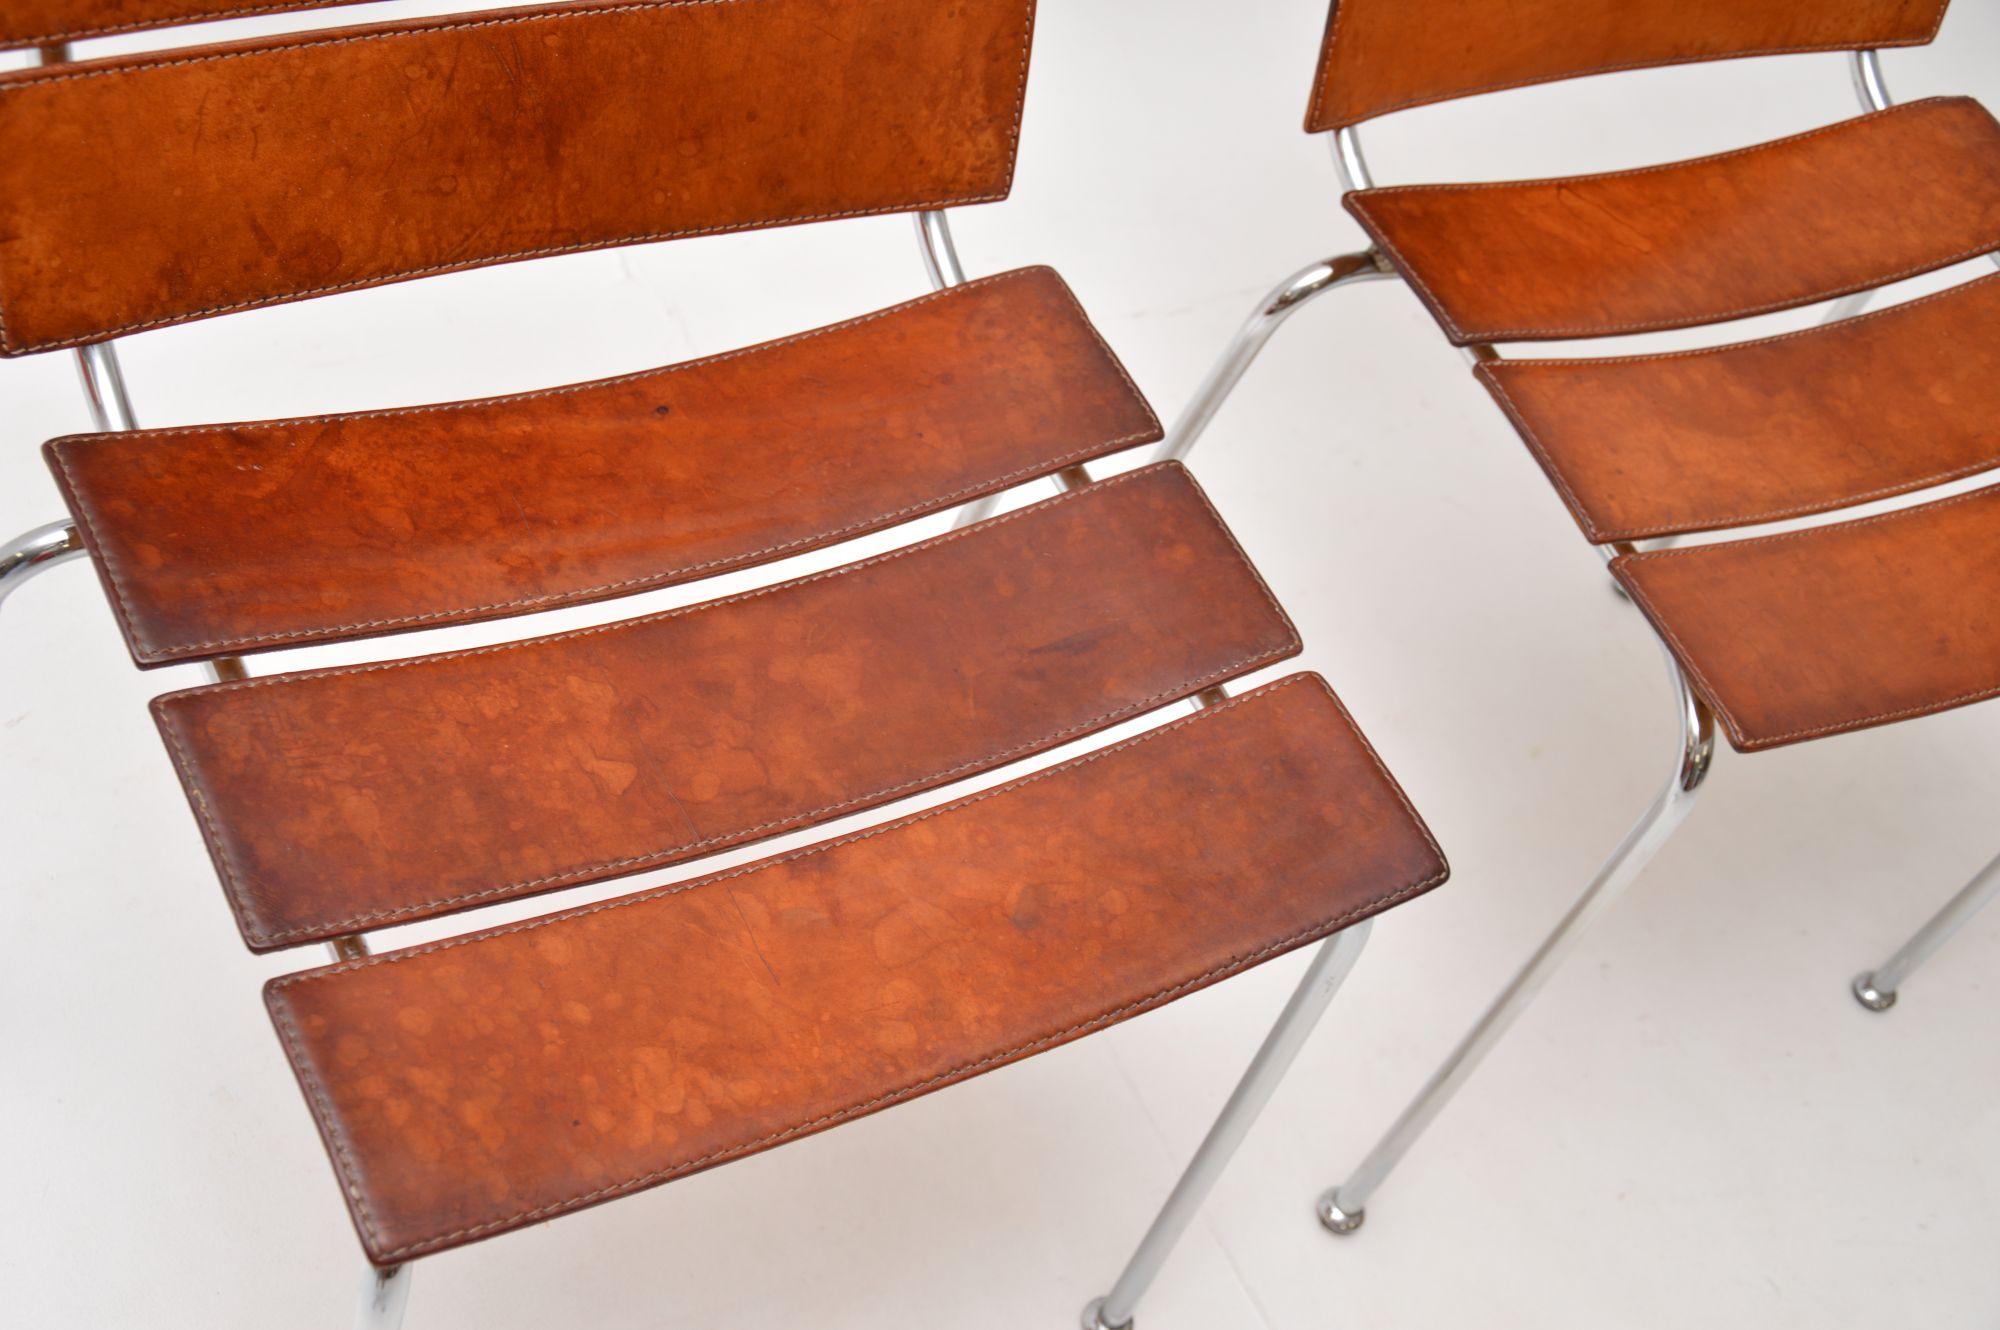 1970’s Pair of Vintage Italian Leather & Chrome ‘Stripe’ Chairs by Giancarlo Veg For Sale 3